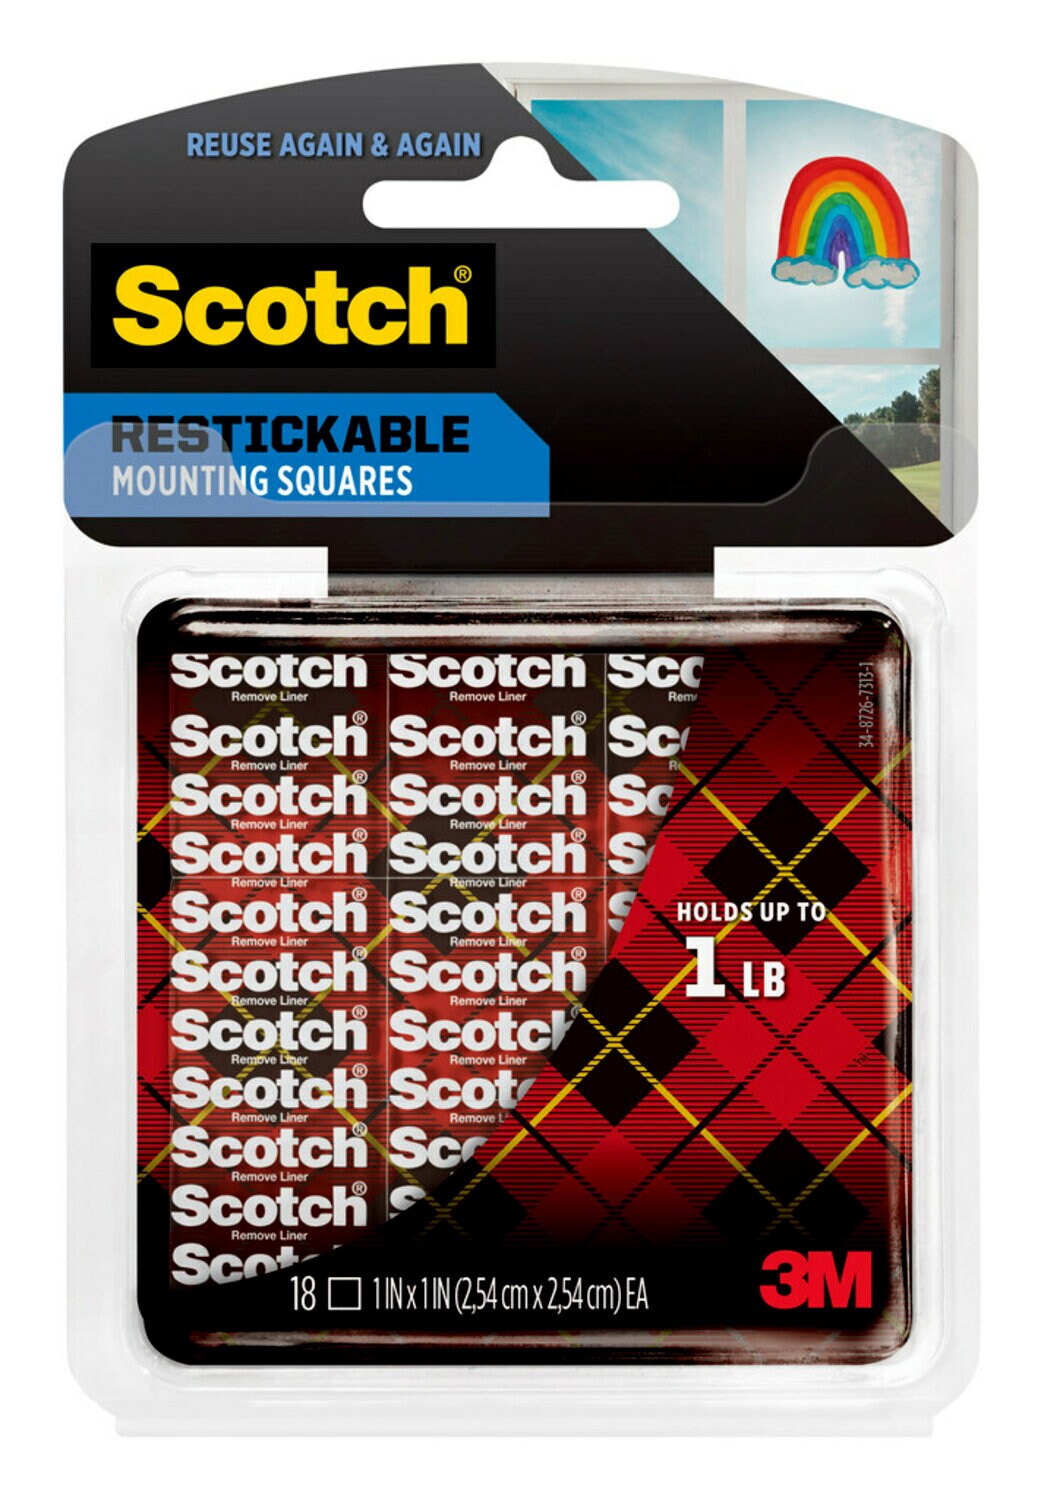 7100245428 - Scotch Restickable Mounting Squares R100S, 1 in x 1 in (2.54 cm x 2.54 cm) 18/pk